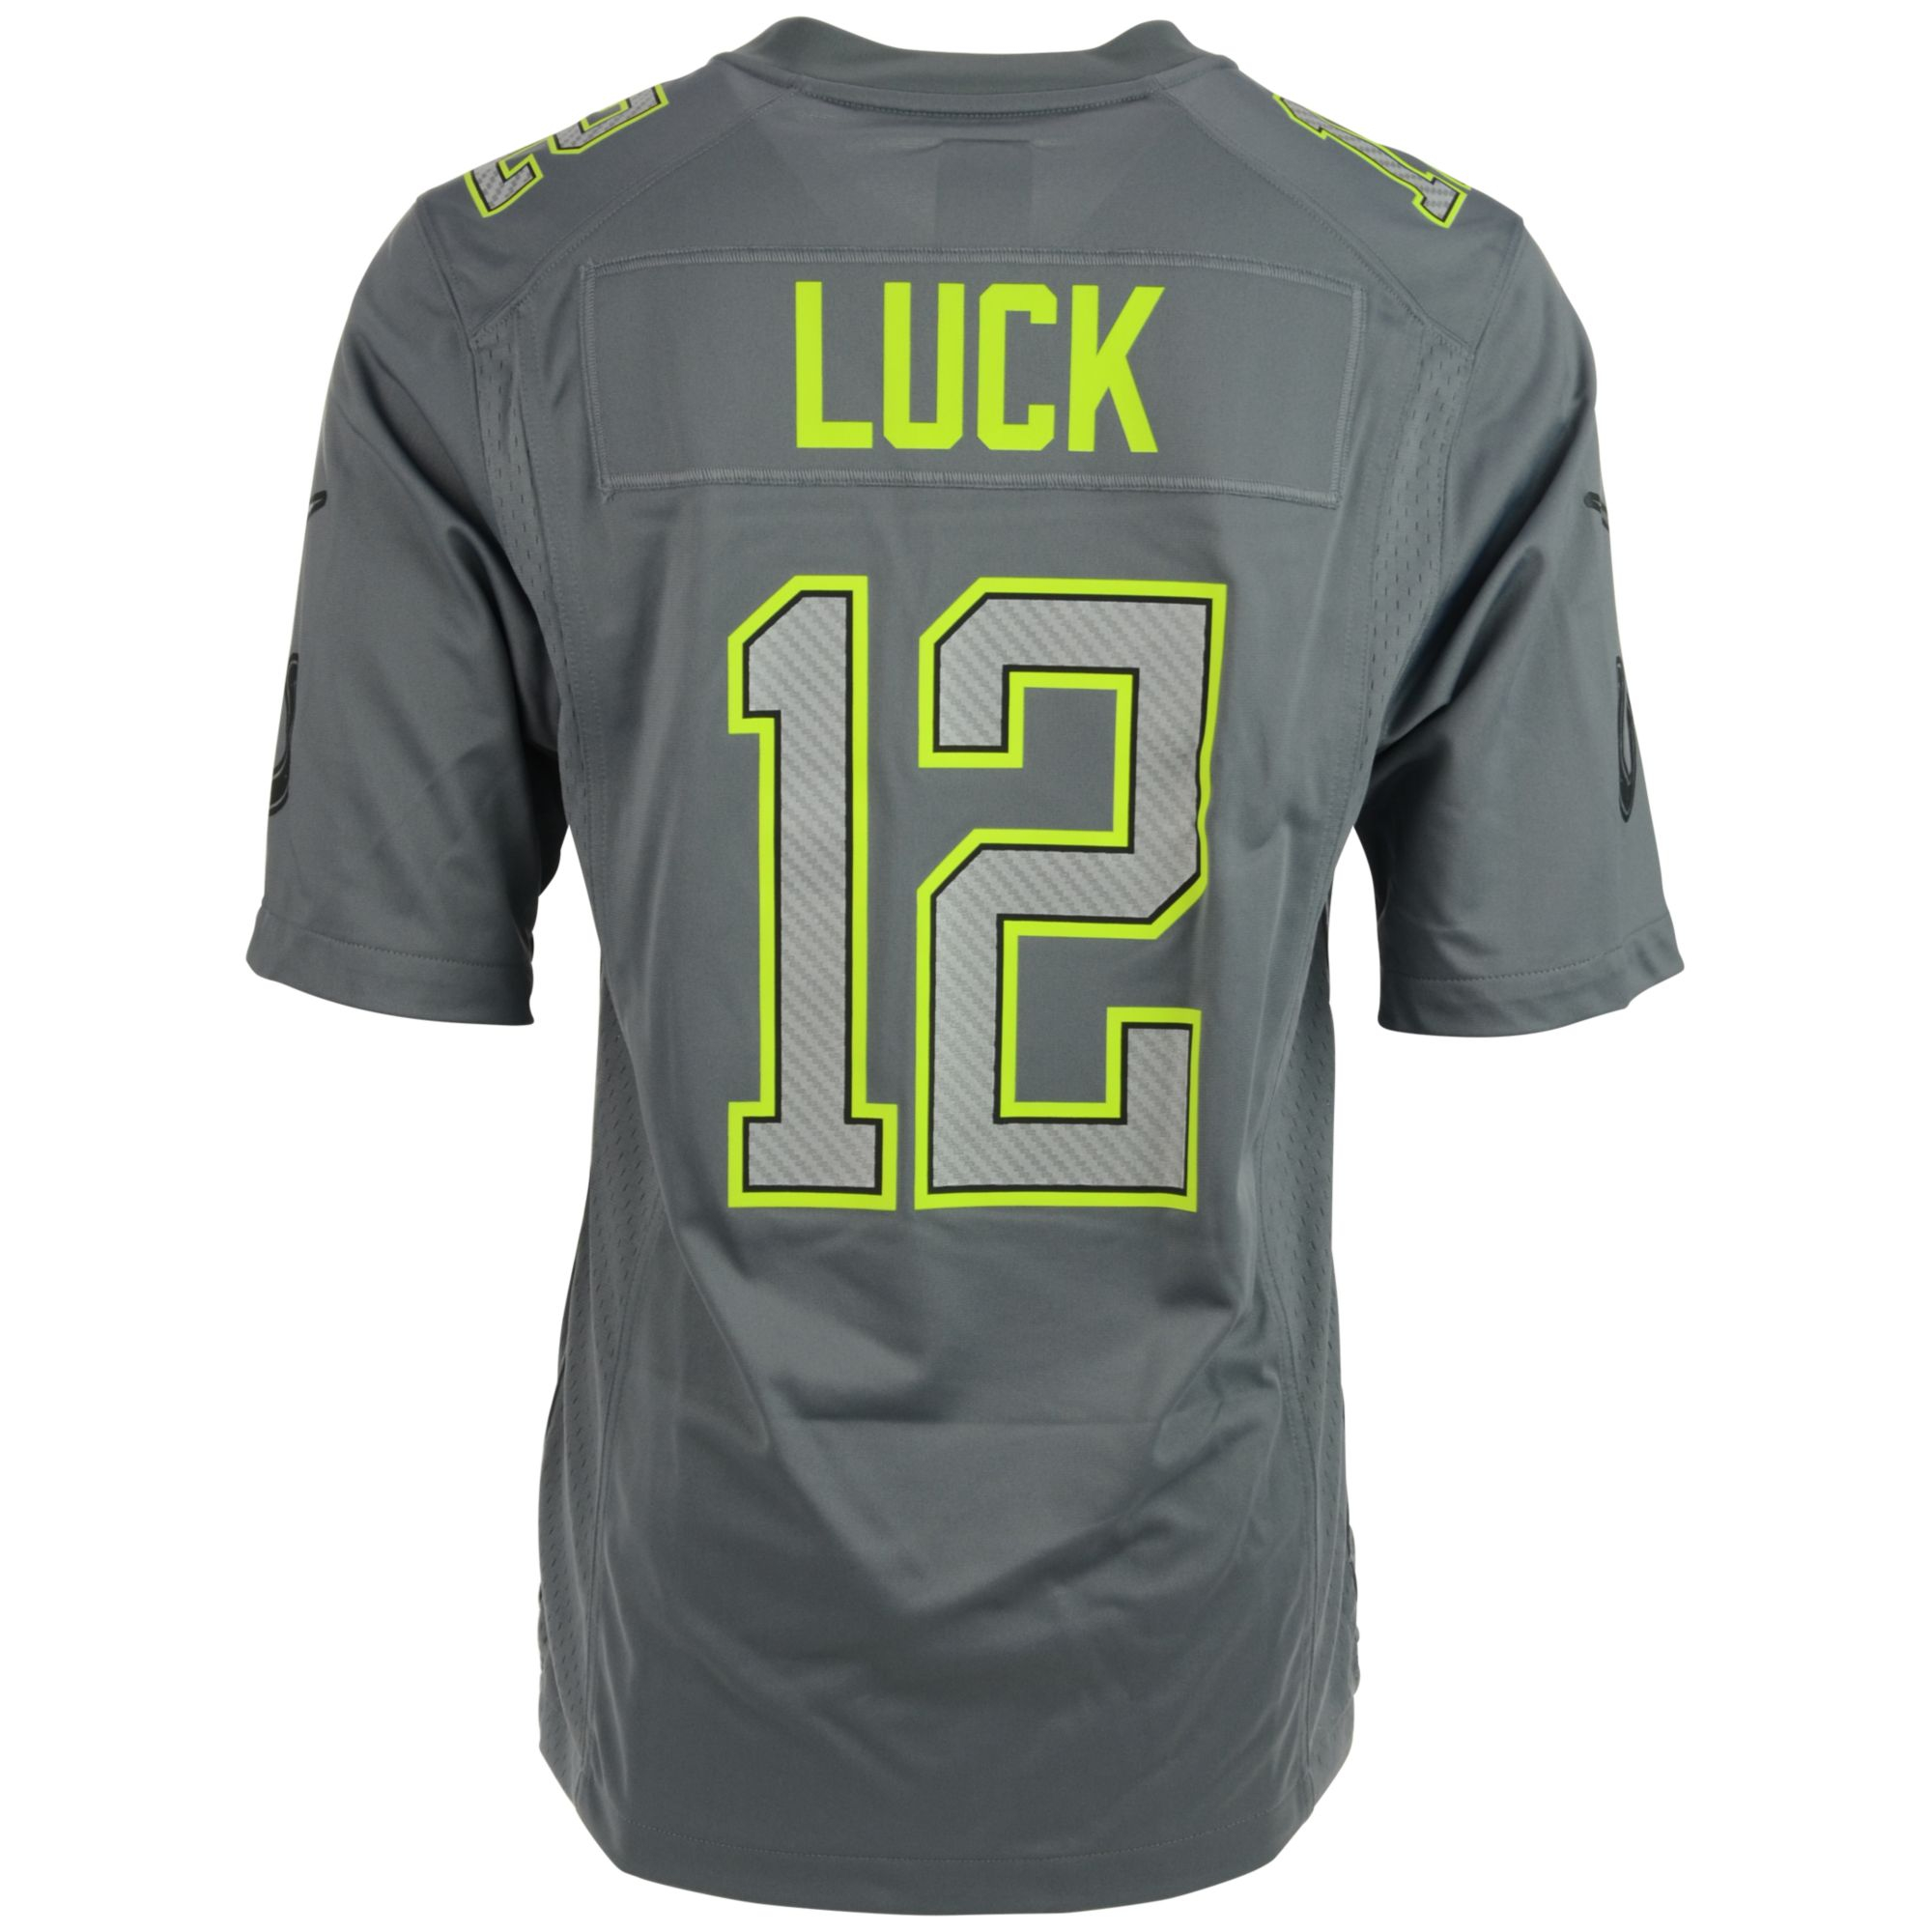 andrew luck pro bowl jersey